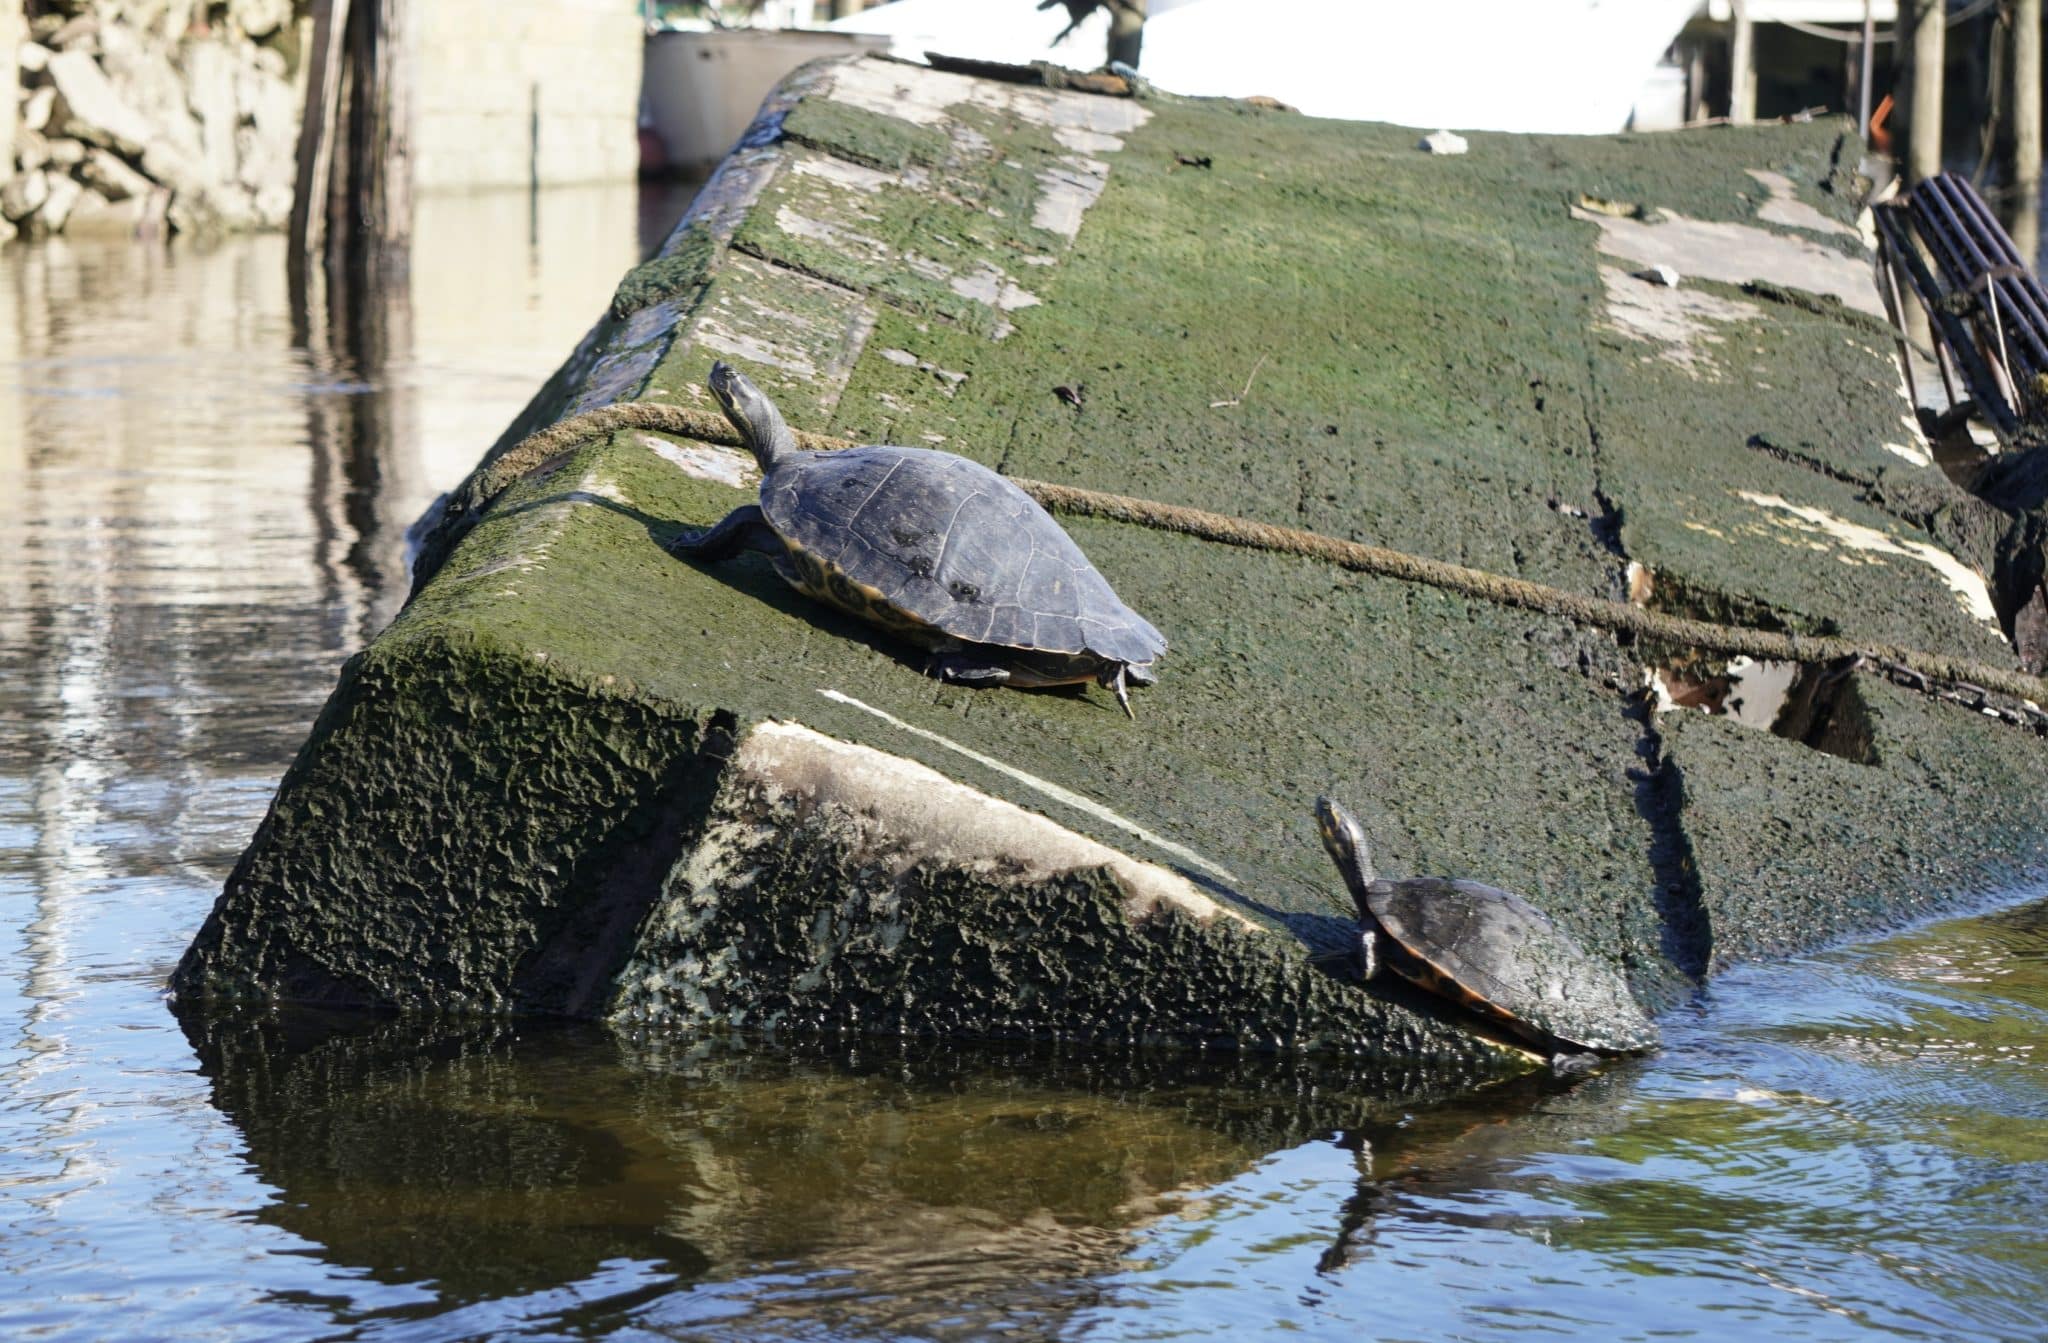 Turtles on a sunken boat following others.